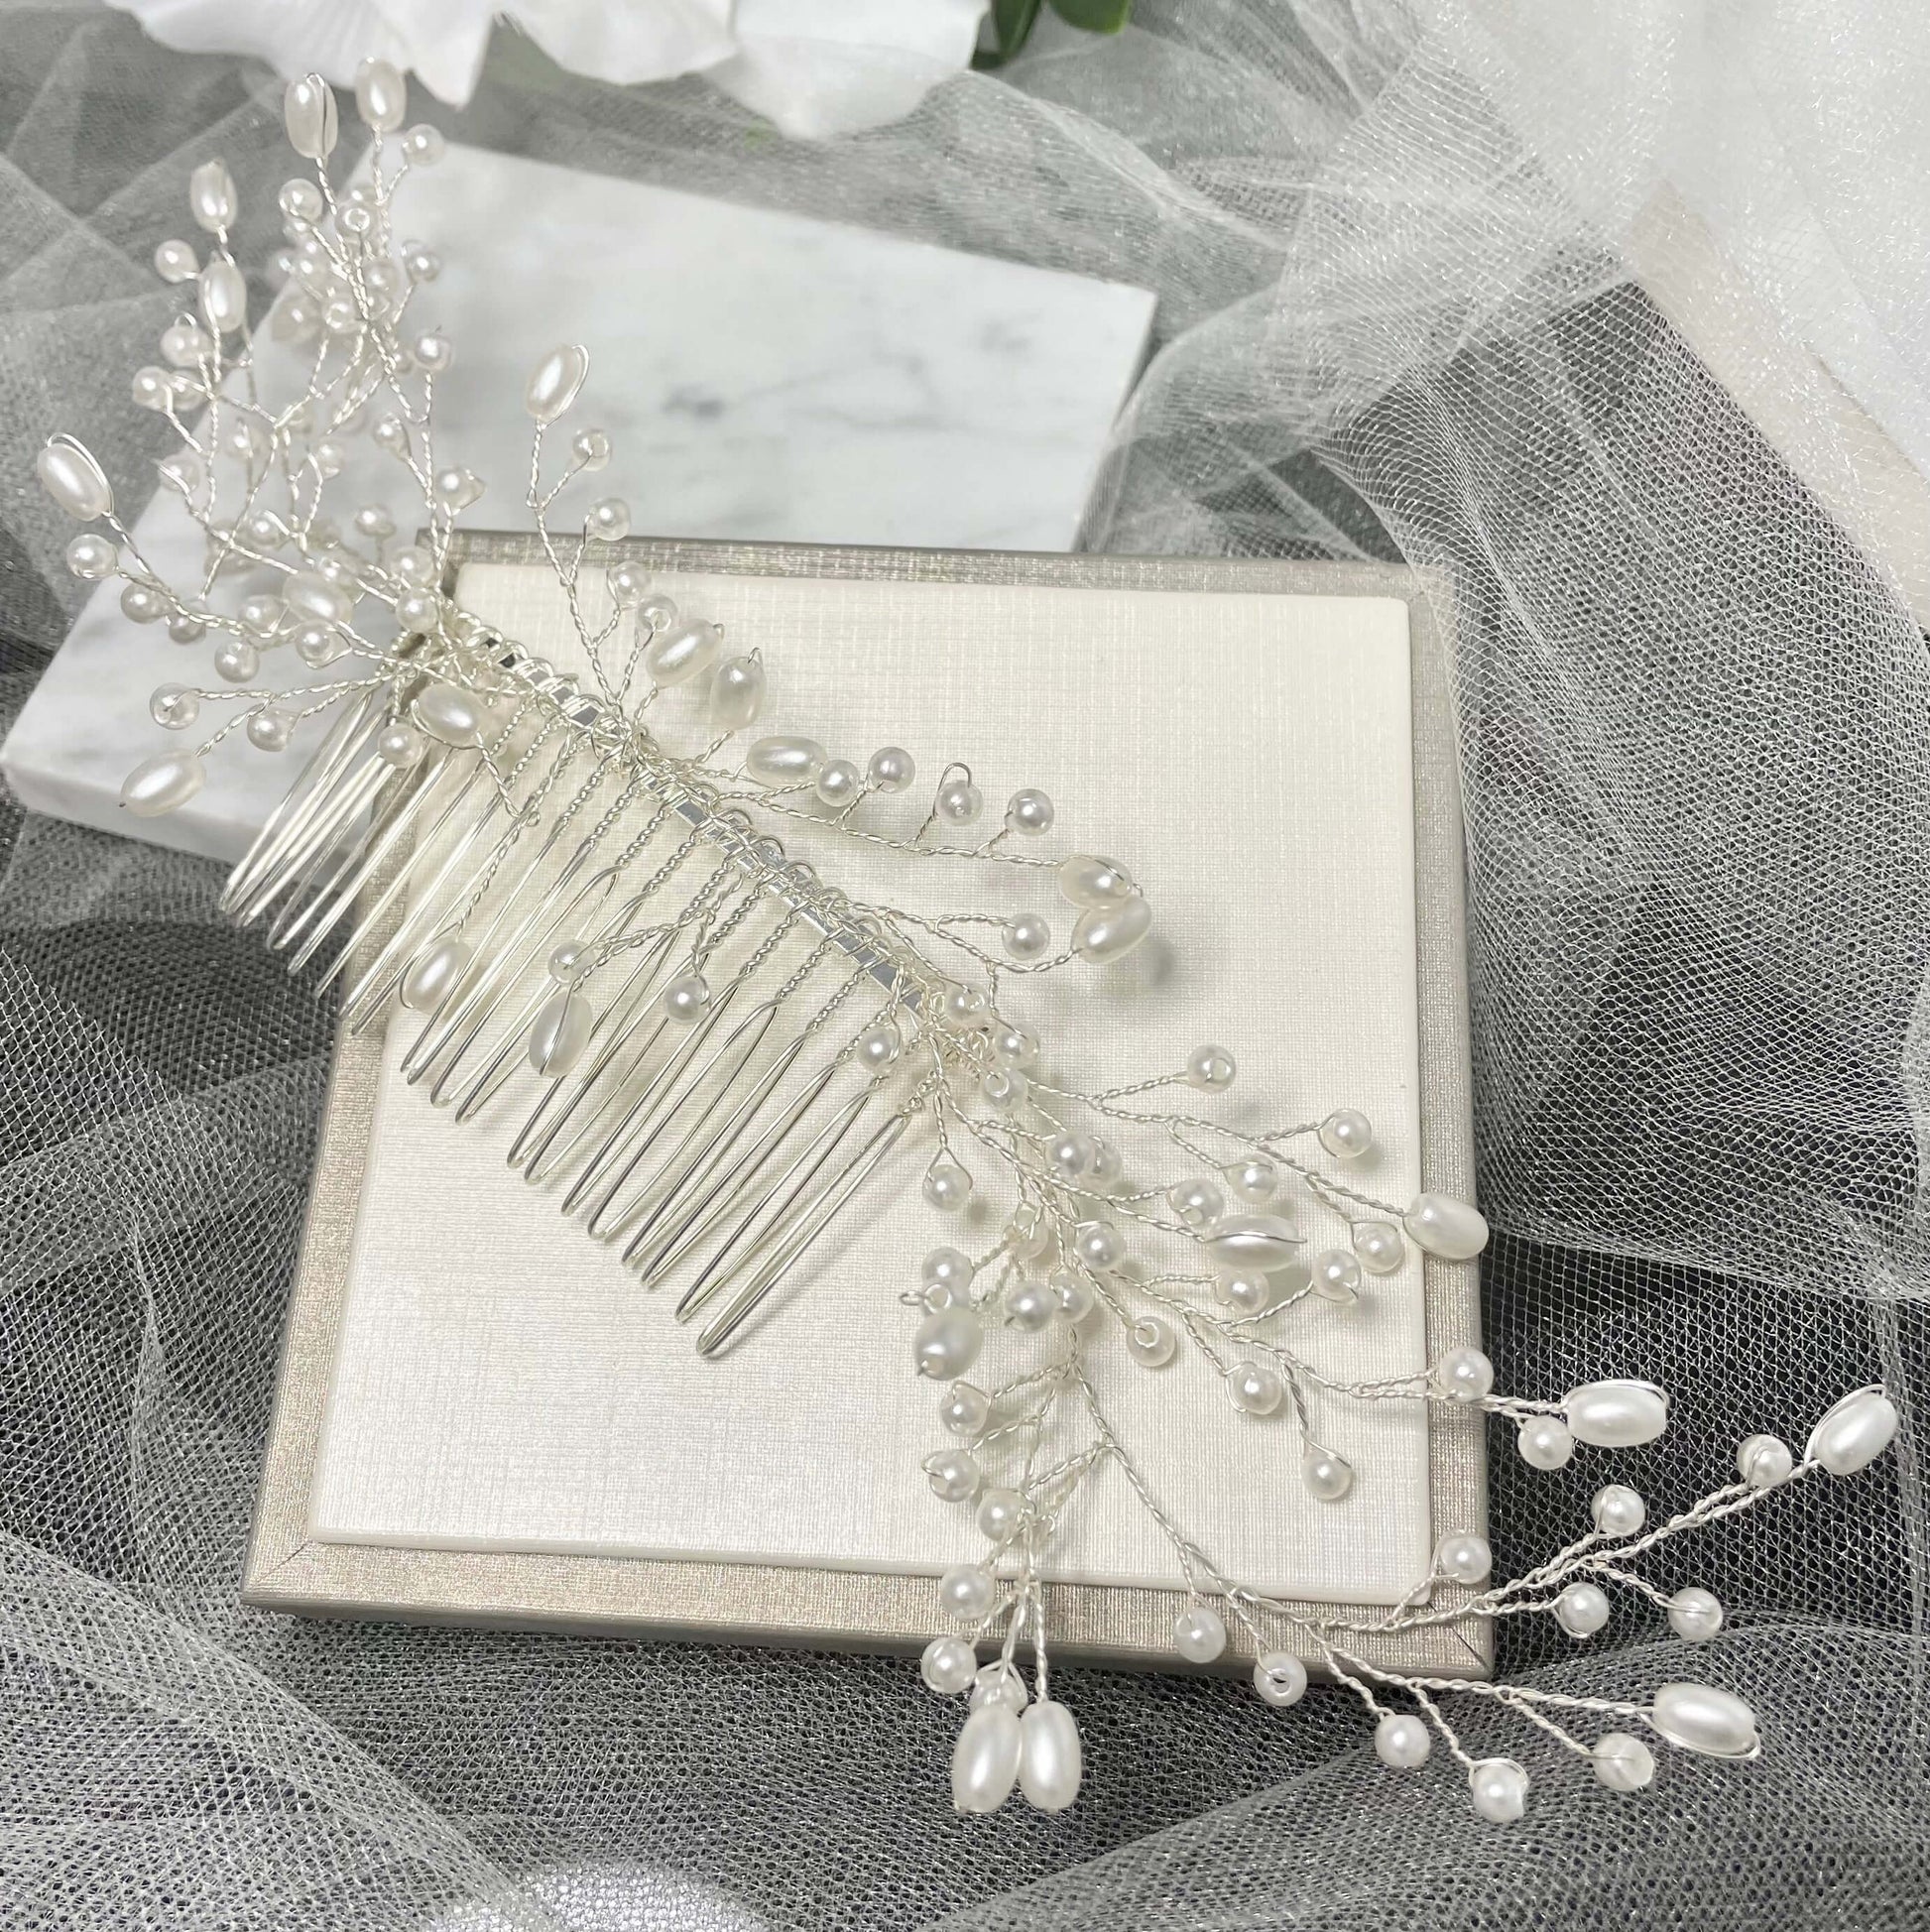 LUCIANA Handmade Pearl Hair Comb featuring delicate pearls and intricate design, measuring approximately 23 cm by 4 cm, perfect for weddings and special occasions.